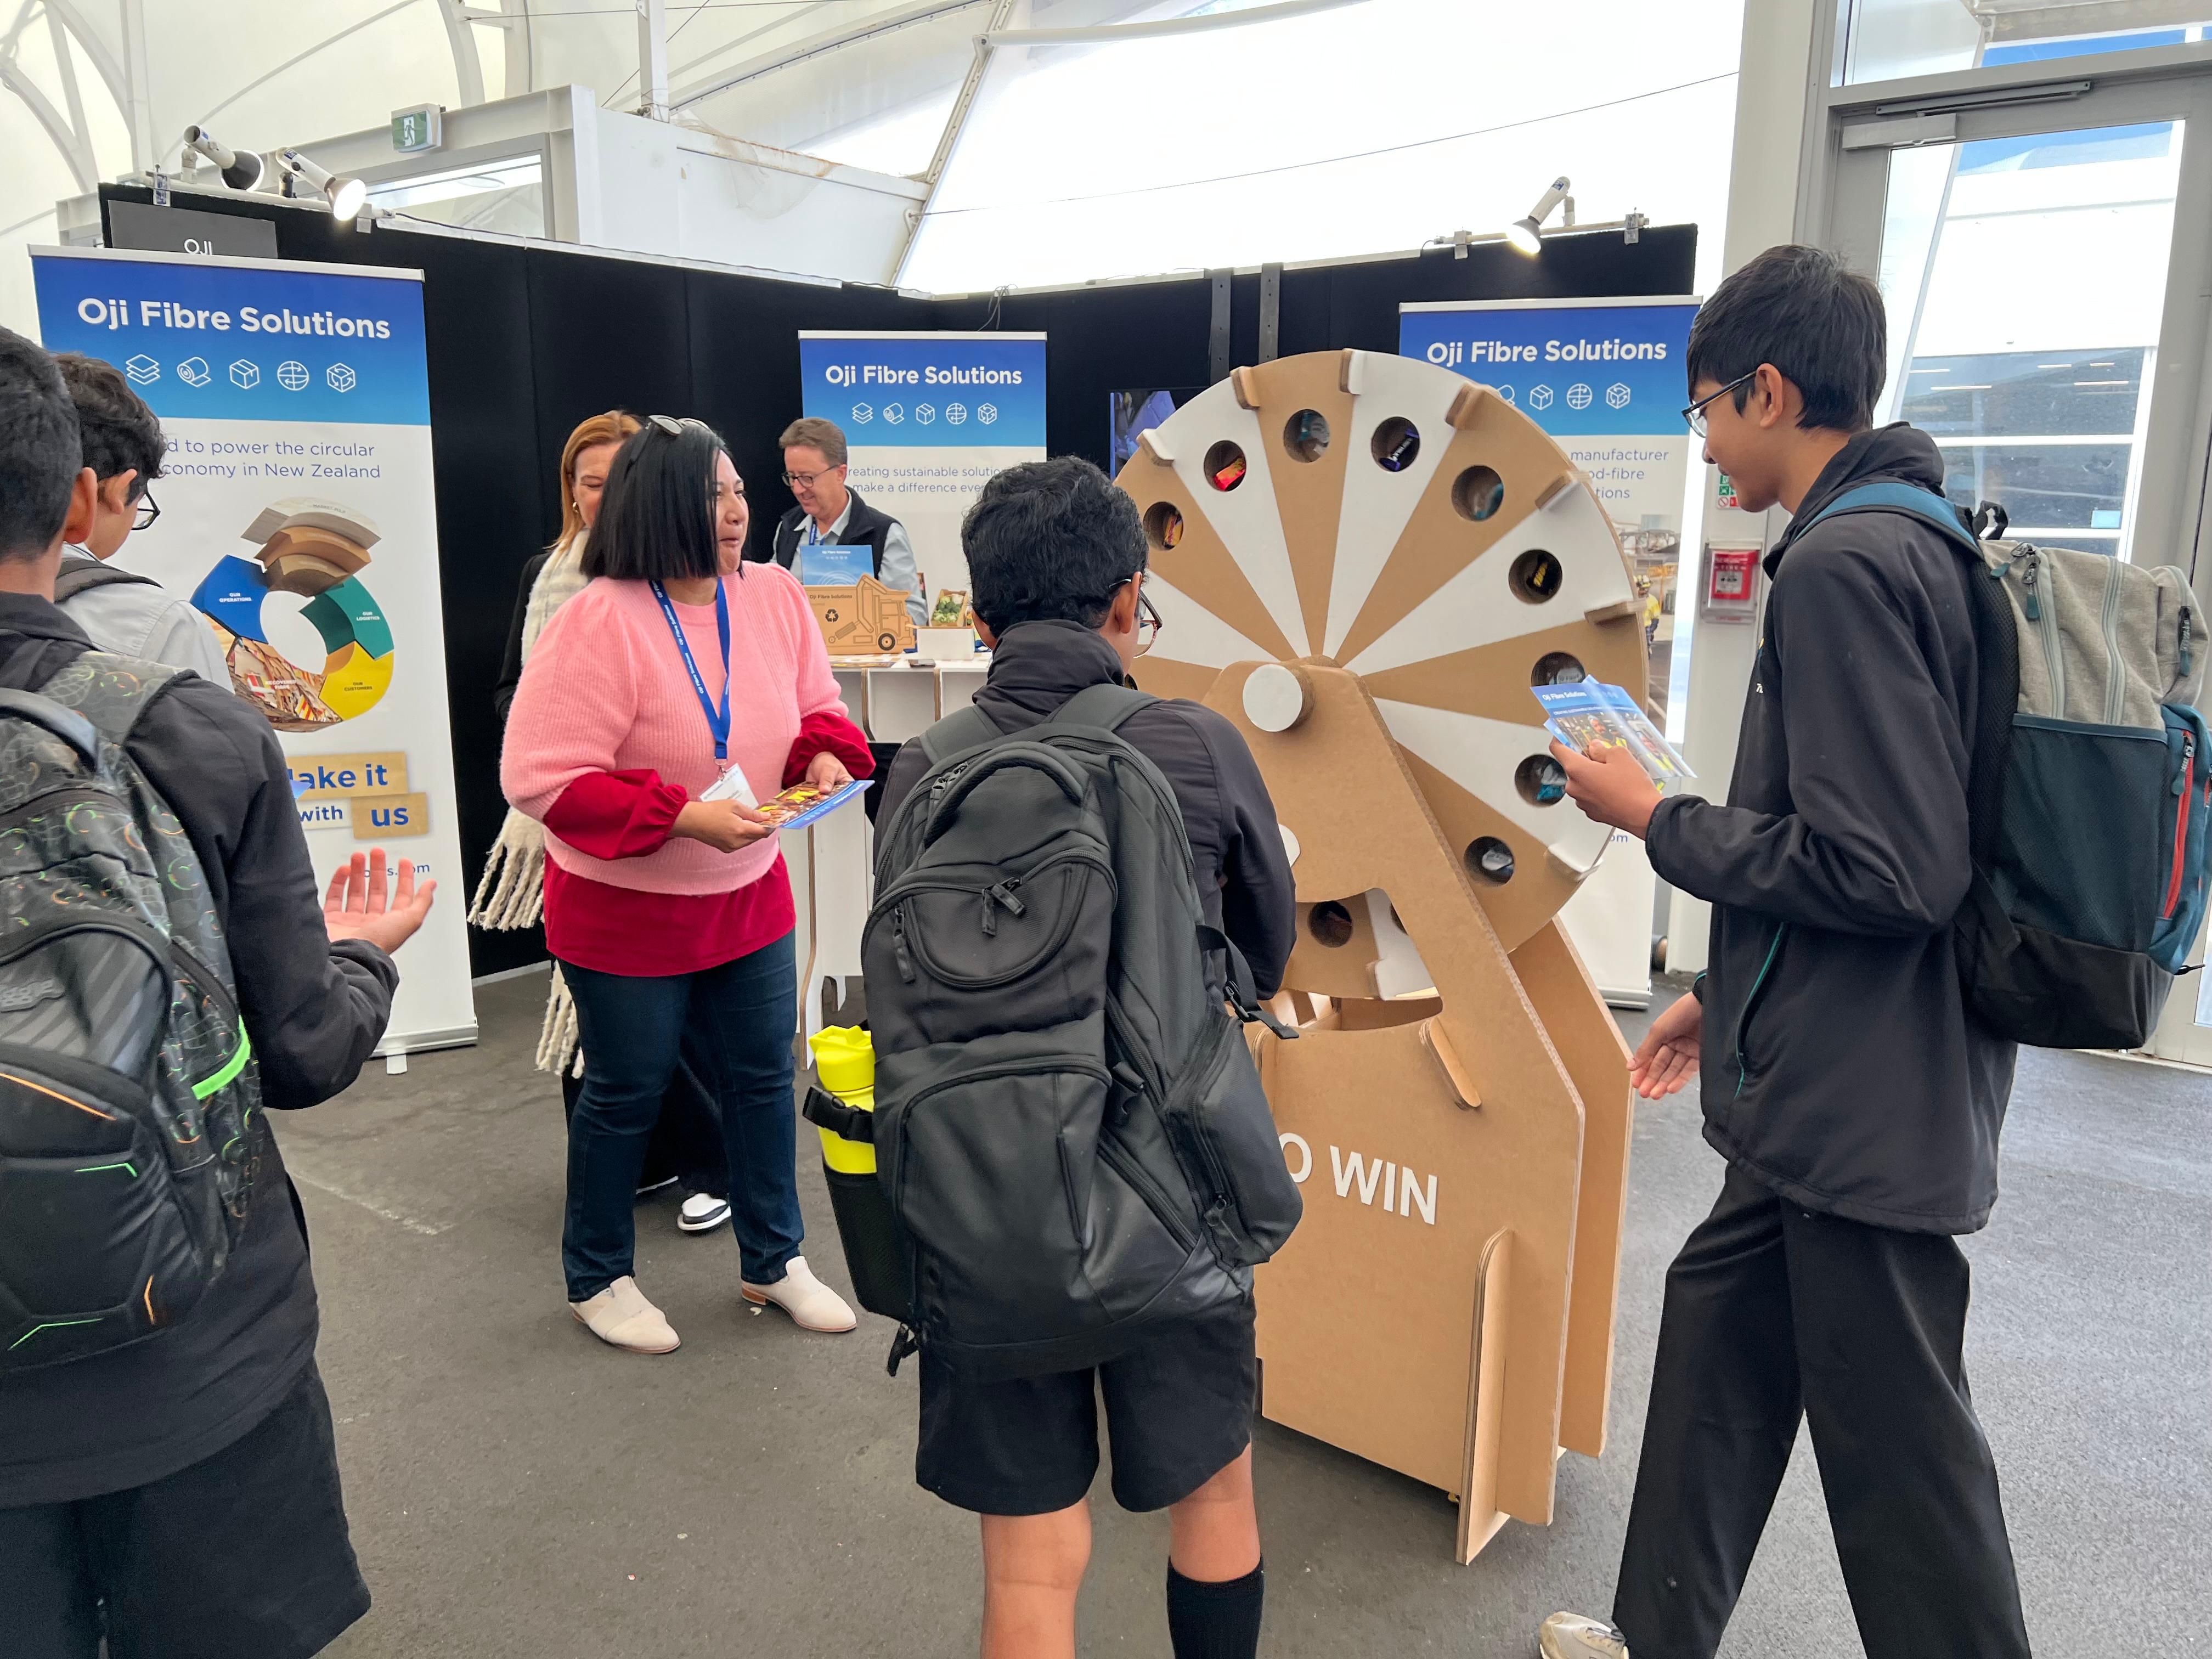 People Playing Spin the Wheel Game